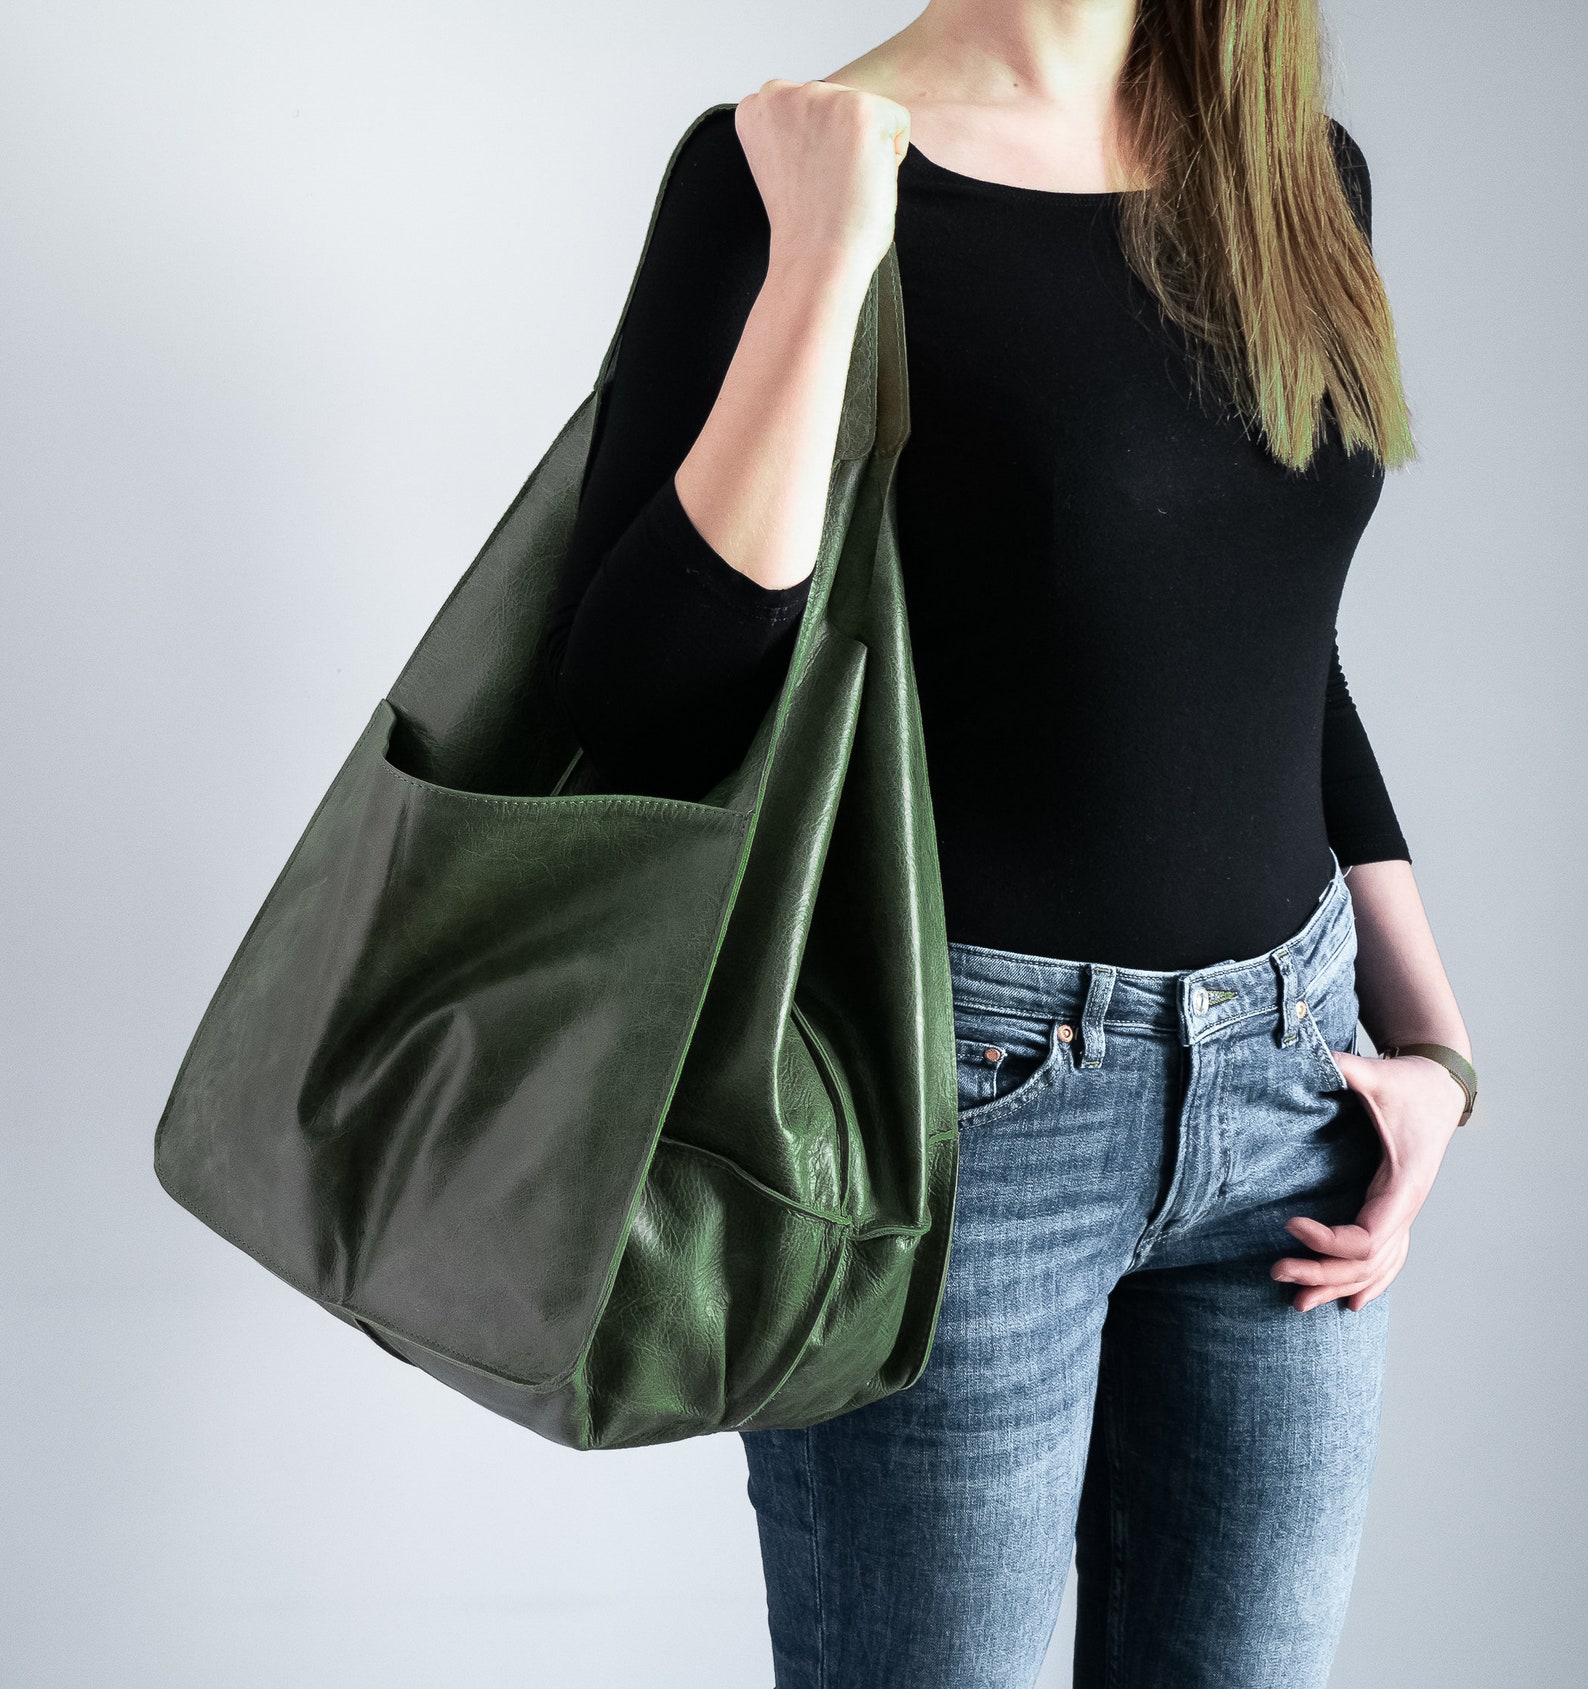 Green LEATHER TOTE Bag Slouchy Tote Dark Green Handbag for - Etsy